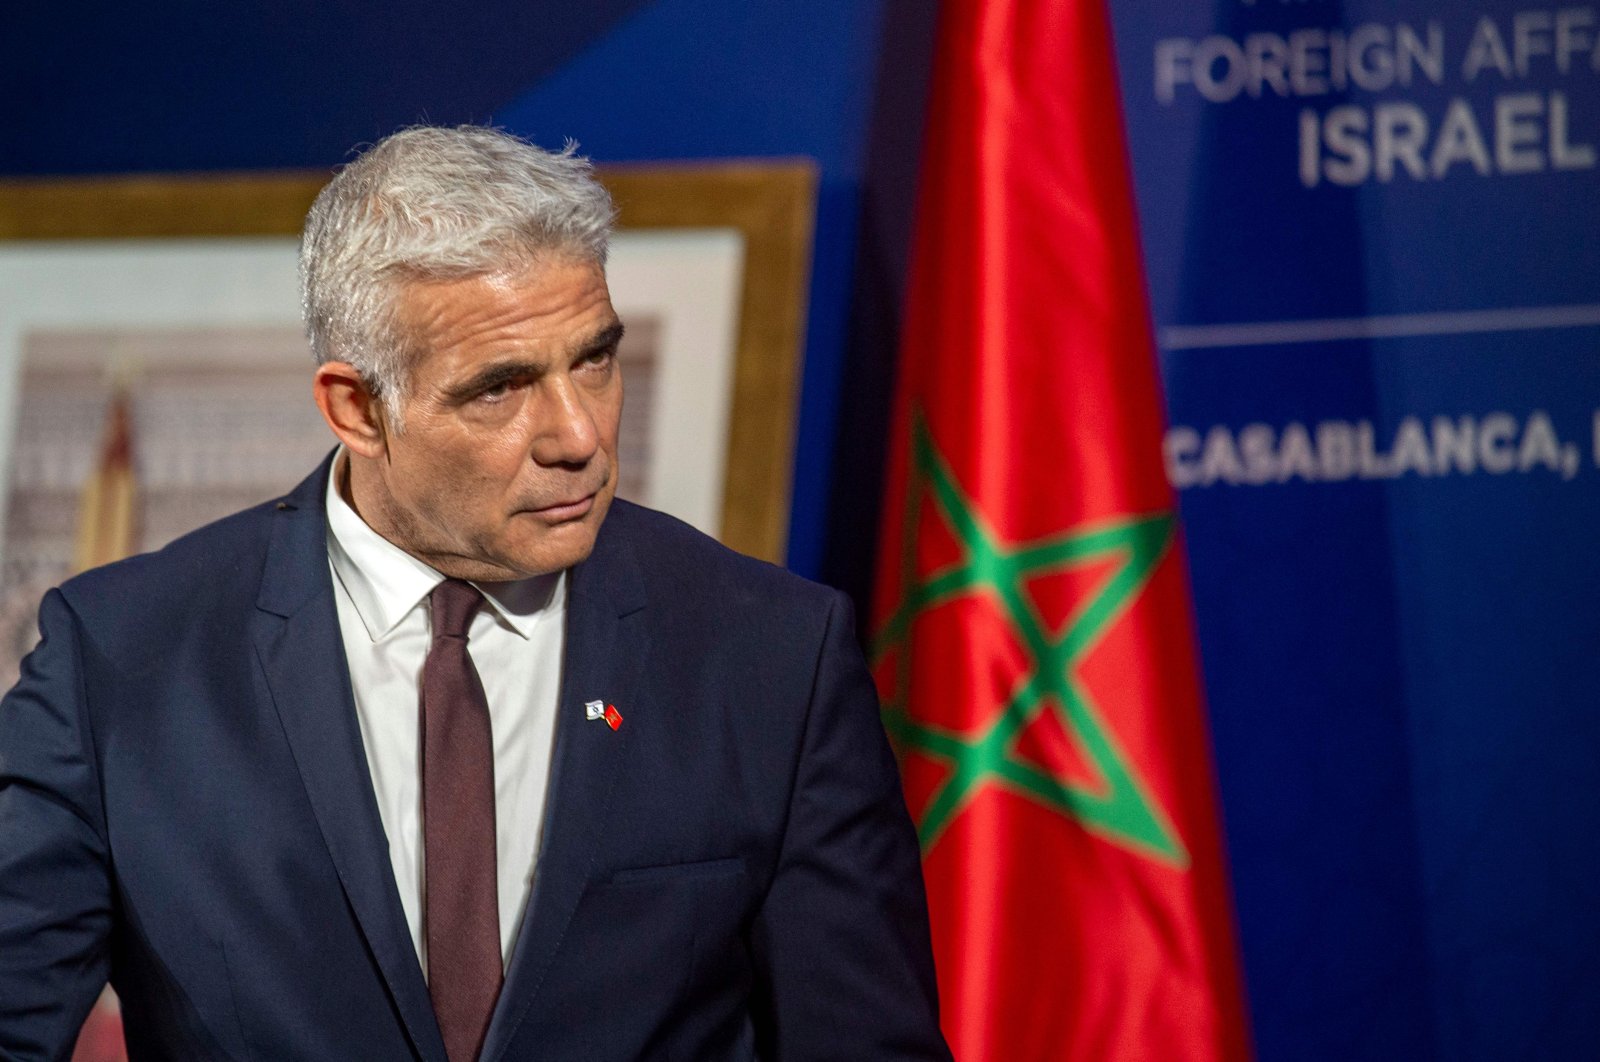 Israeli alternate Prime Minister and Foreign Minister Yair Lapid gives a news conference in Casablanca, Morocco, Aug. 12, 2021. (AFP Photo)